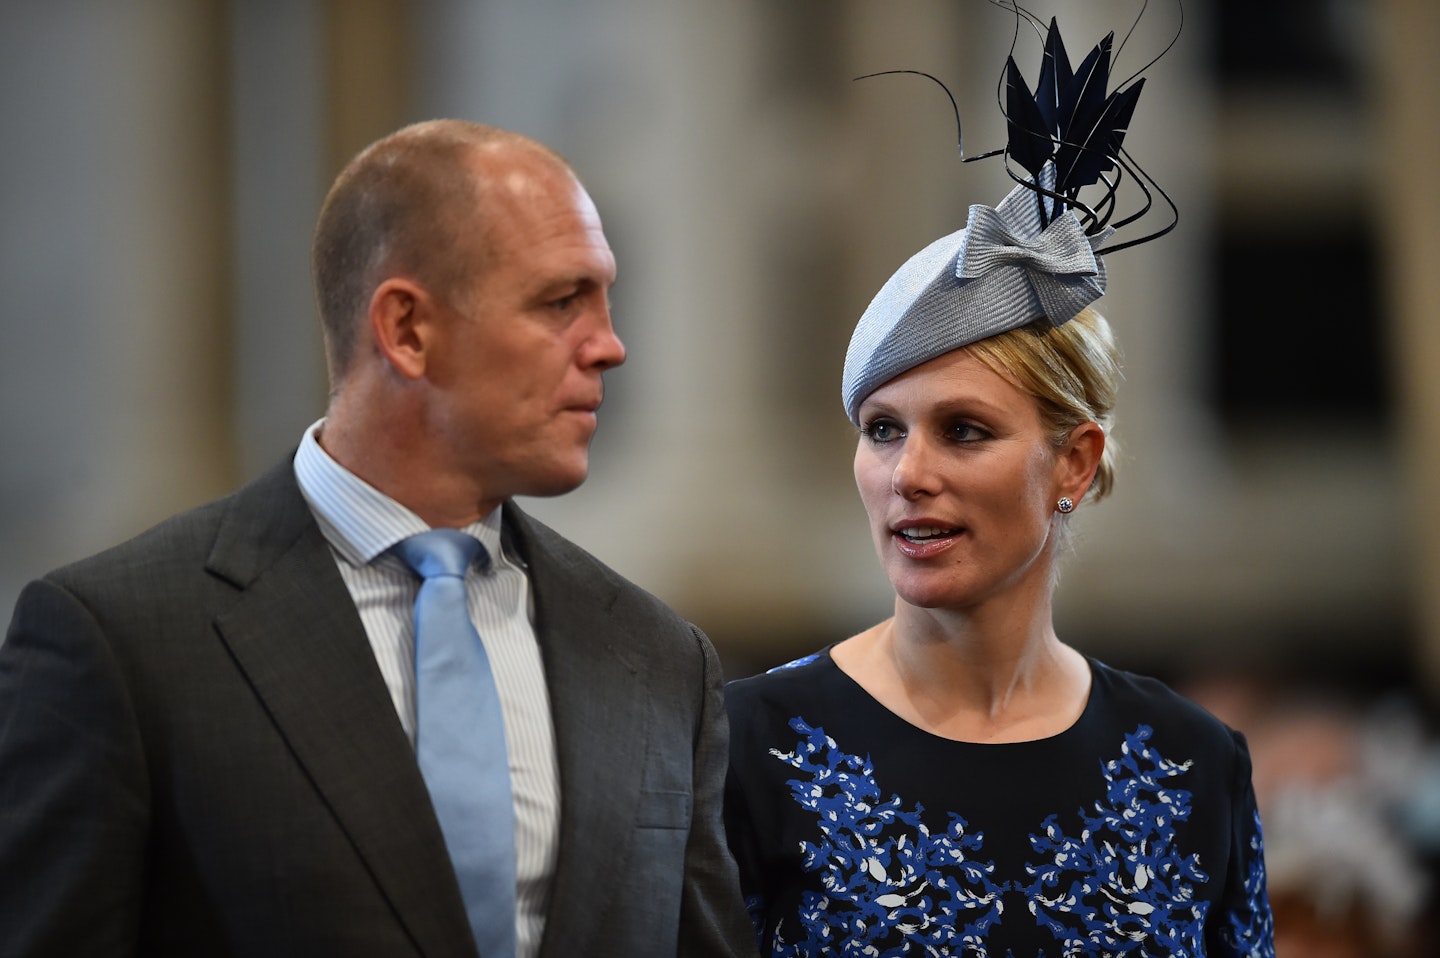 Zara Phillips and Mike Tindall